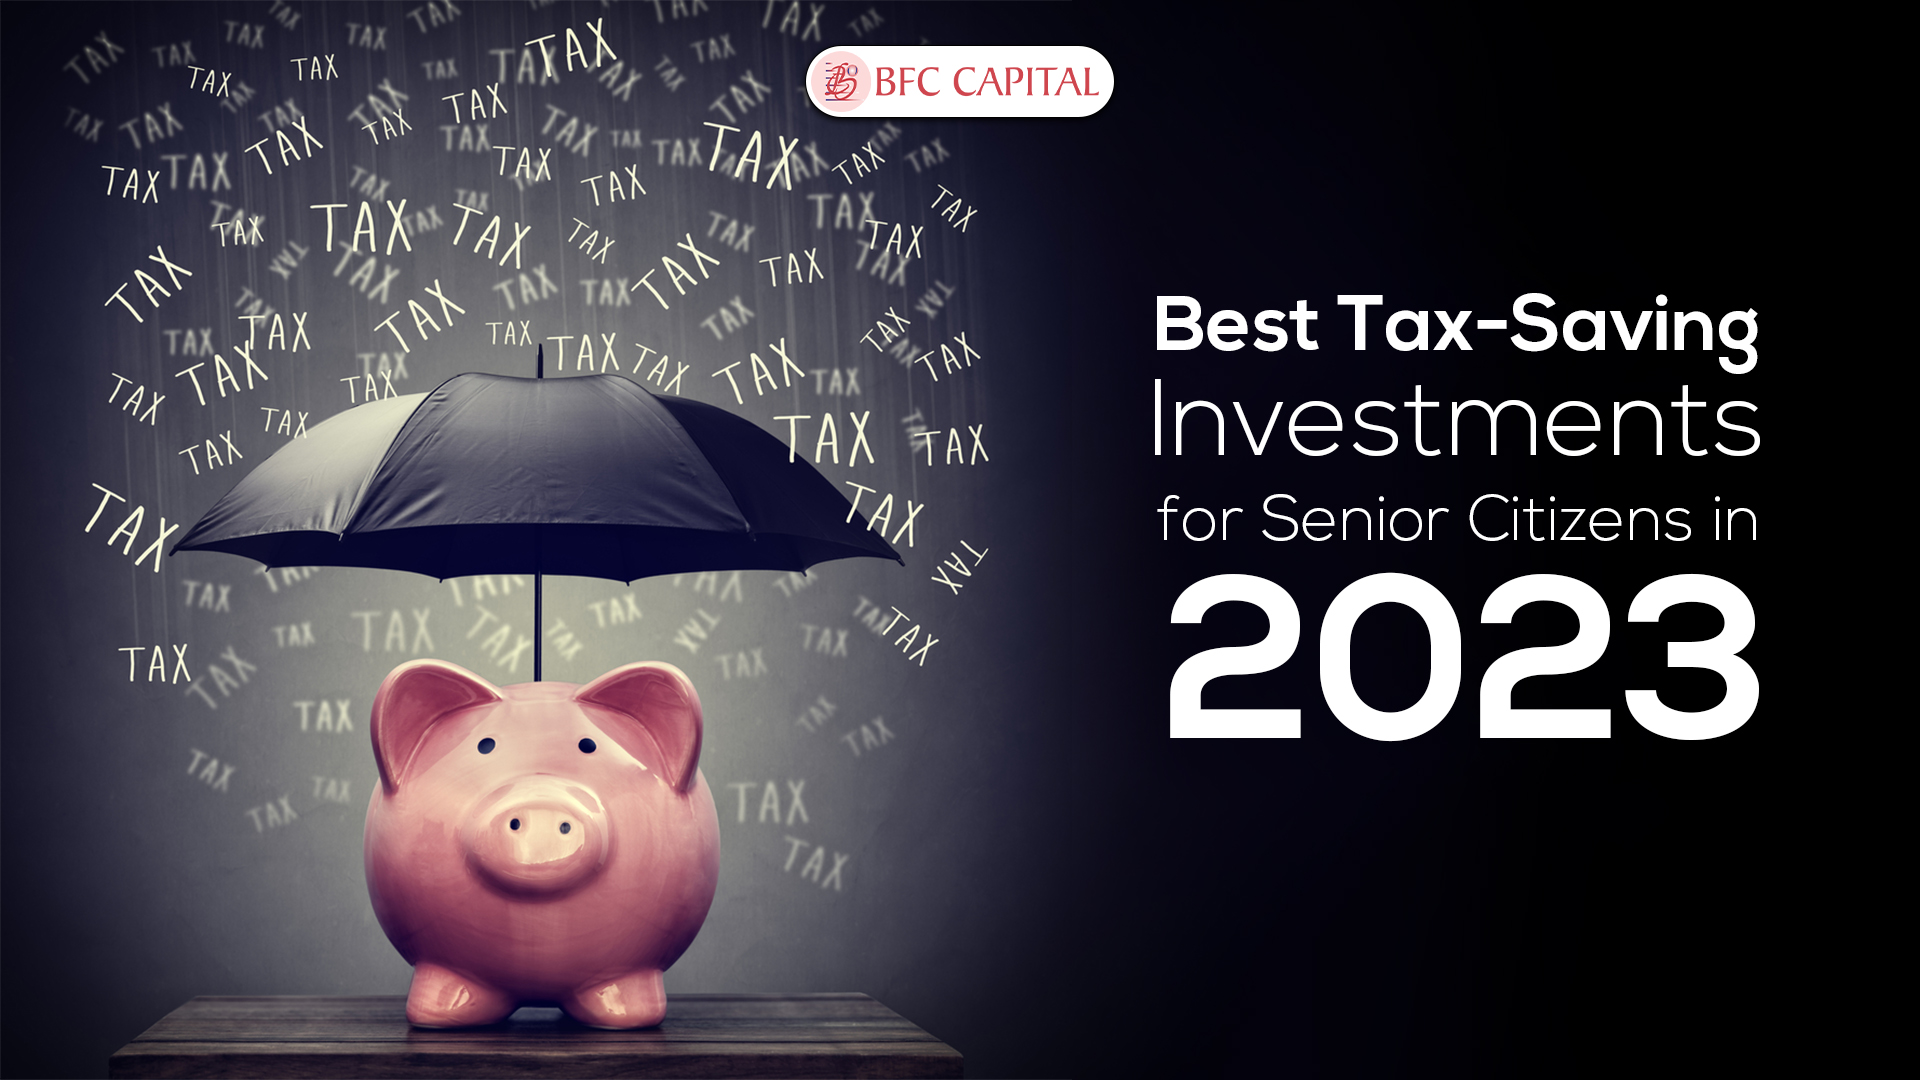 Best Tax-Saving Investments for Senior Citizens in 2023